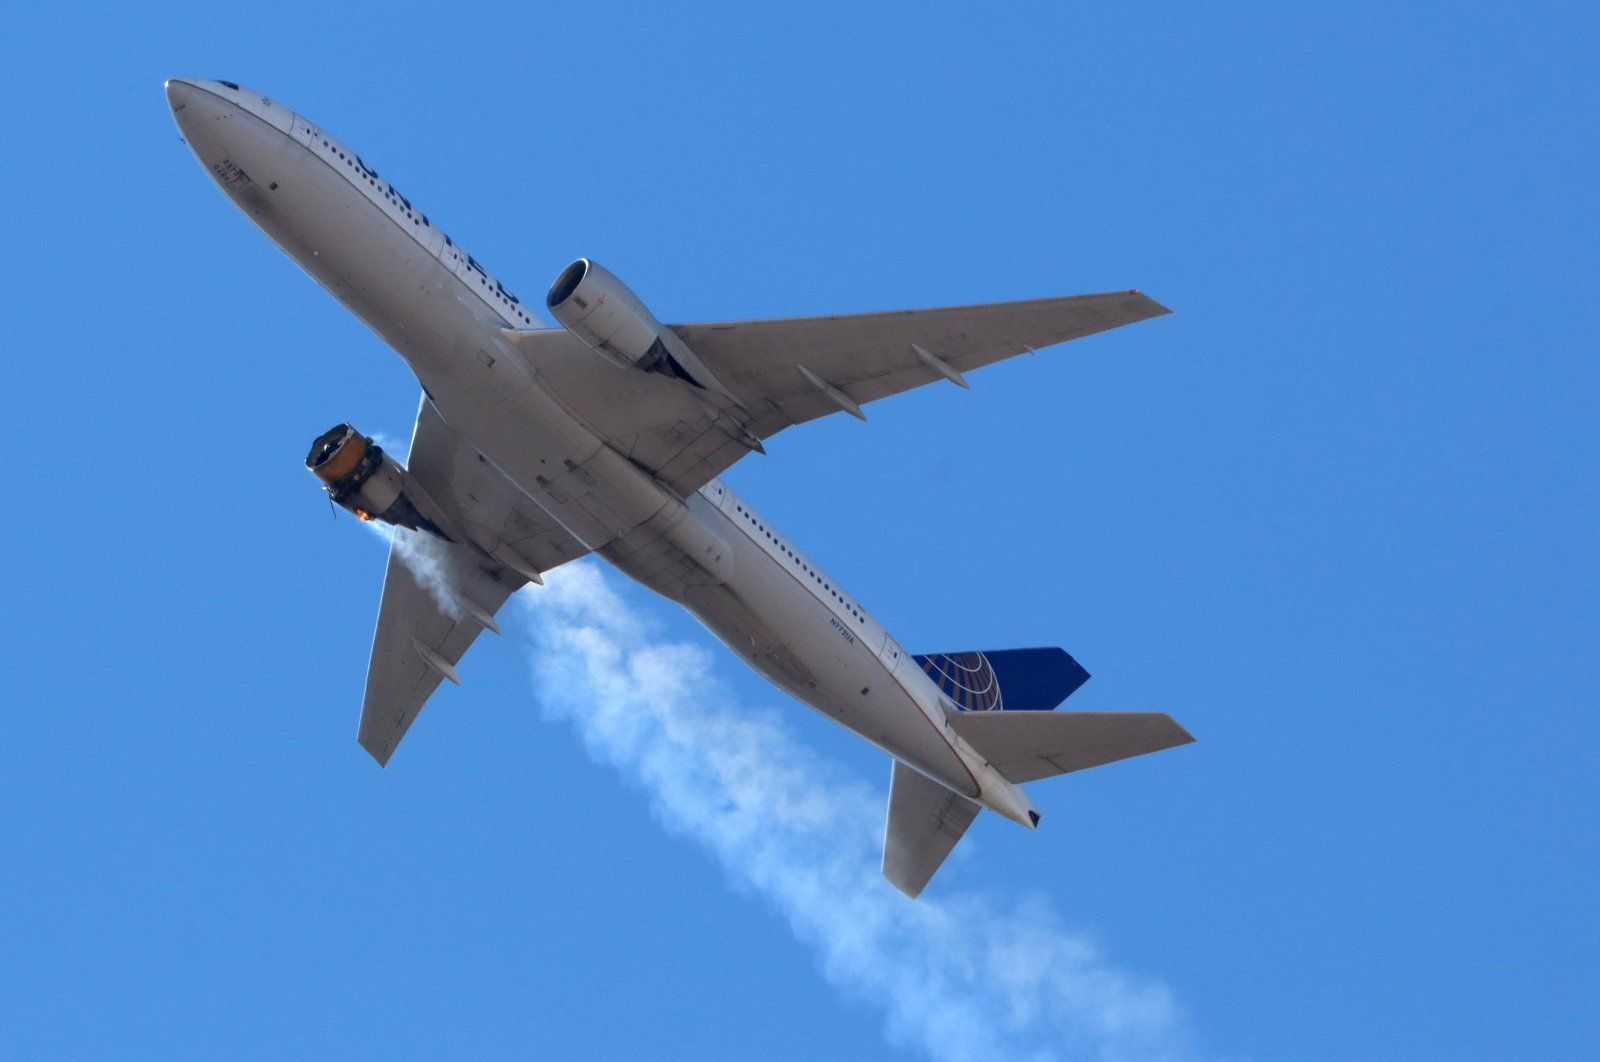 United Airlines flight UA328, carrying 231 passengers and 10 crew on board, returns to Denver International Airport with its starboard engine on fire after it sent a Mayday alert, over Denver, Colorado, U.S., Feb. 20, 2021. (Reuters Photo) 